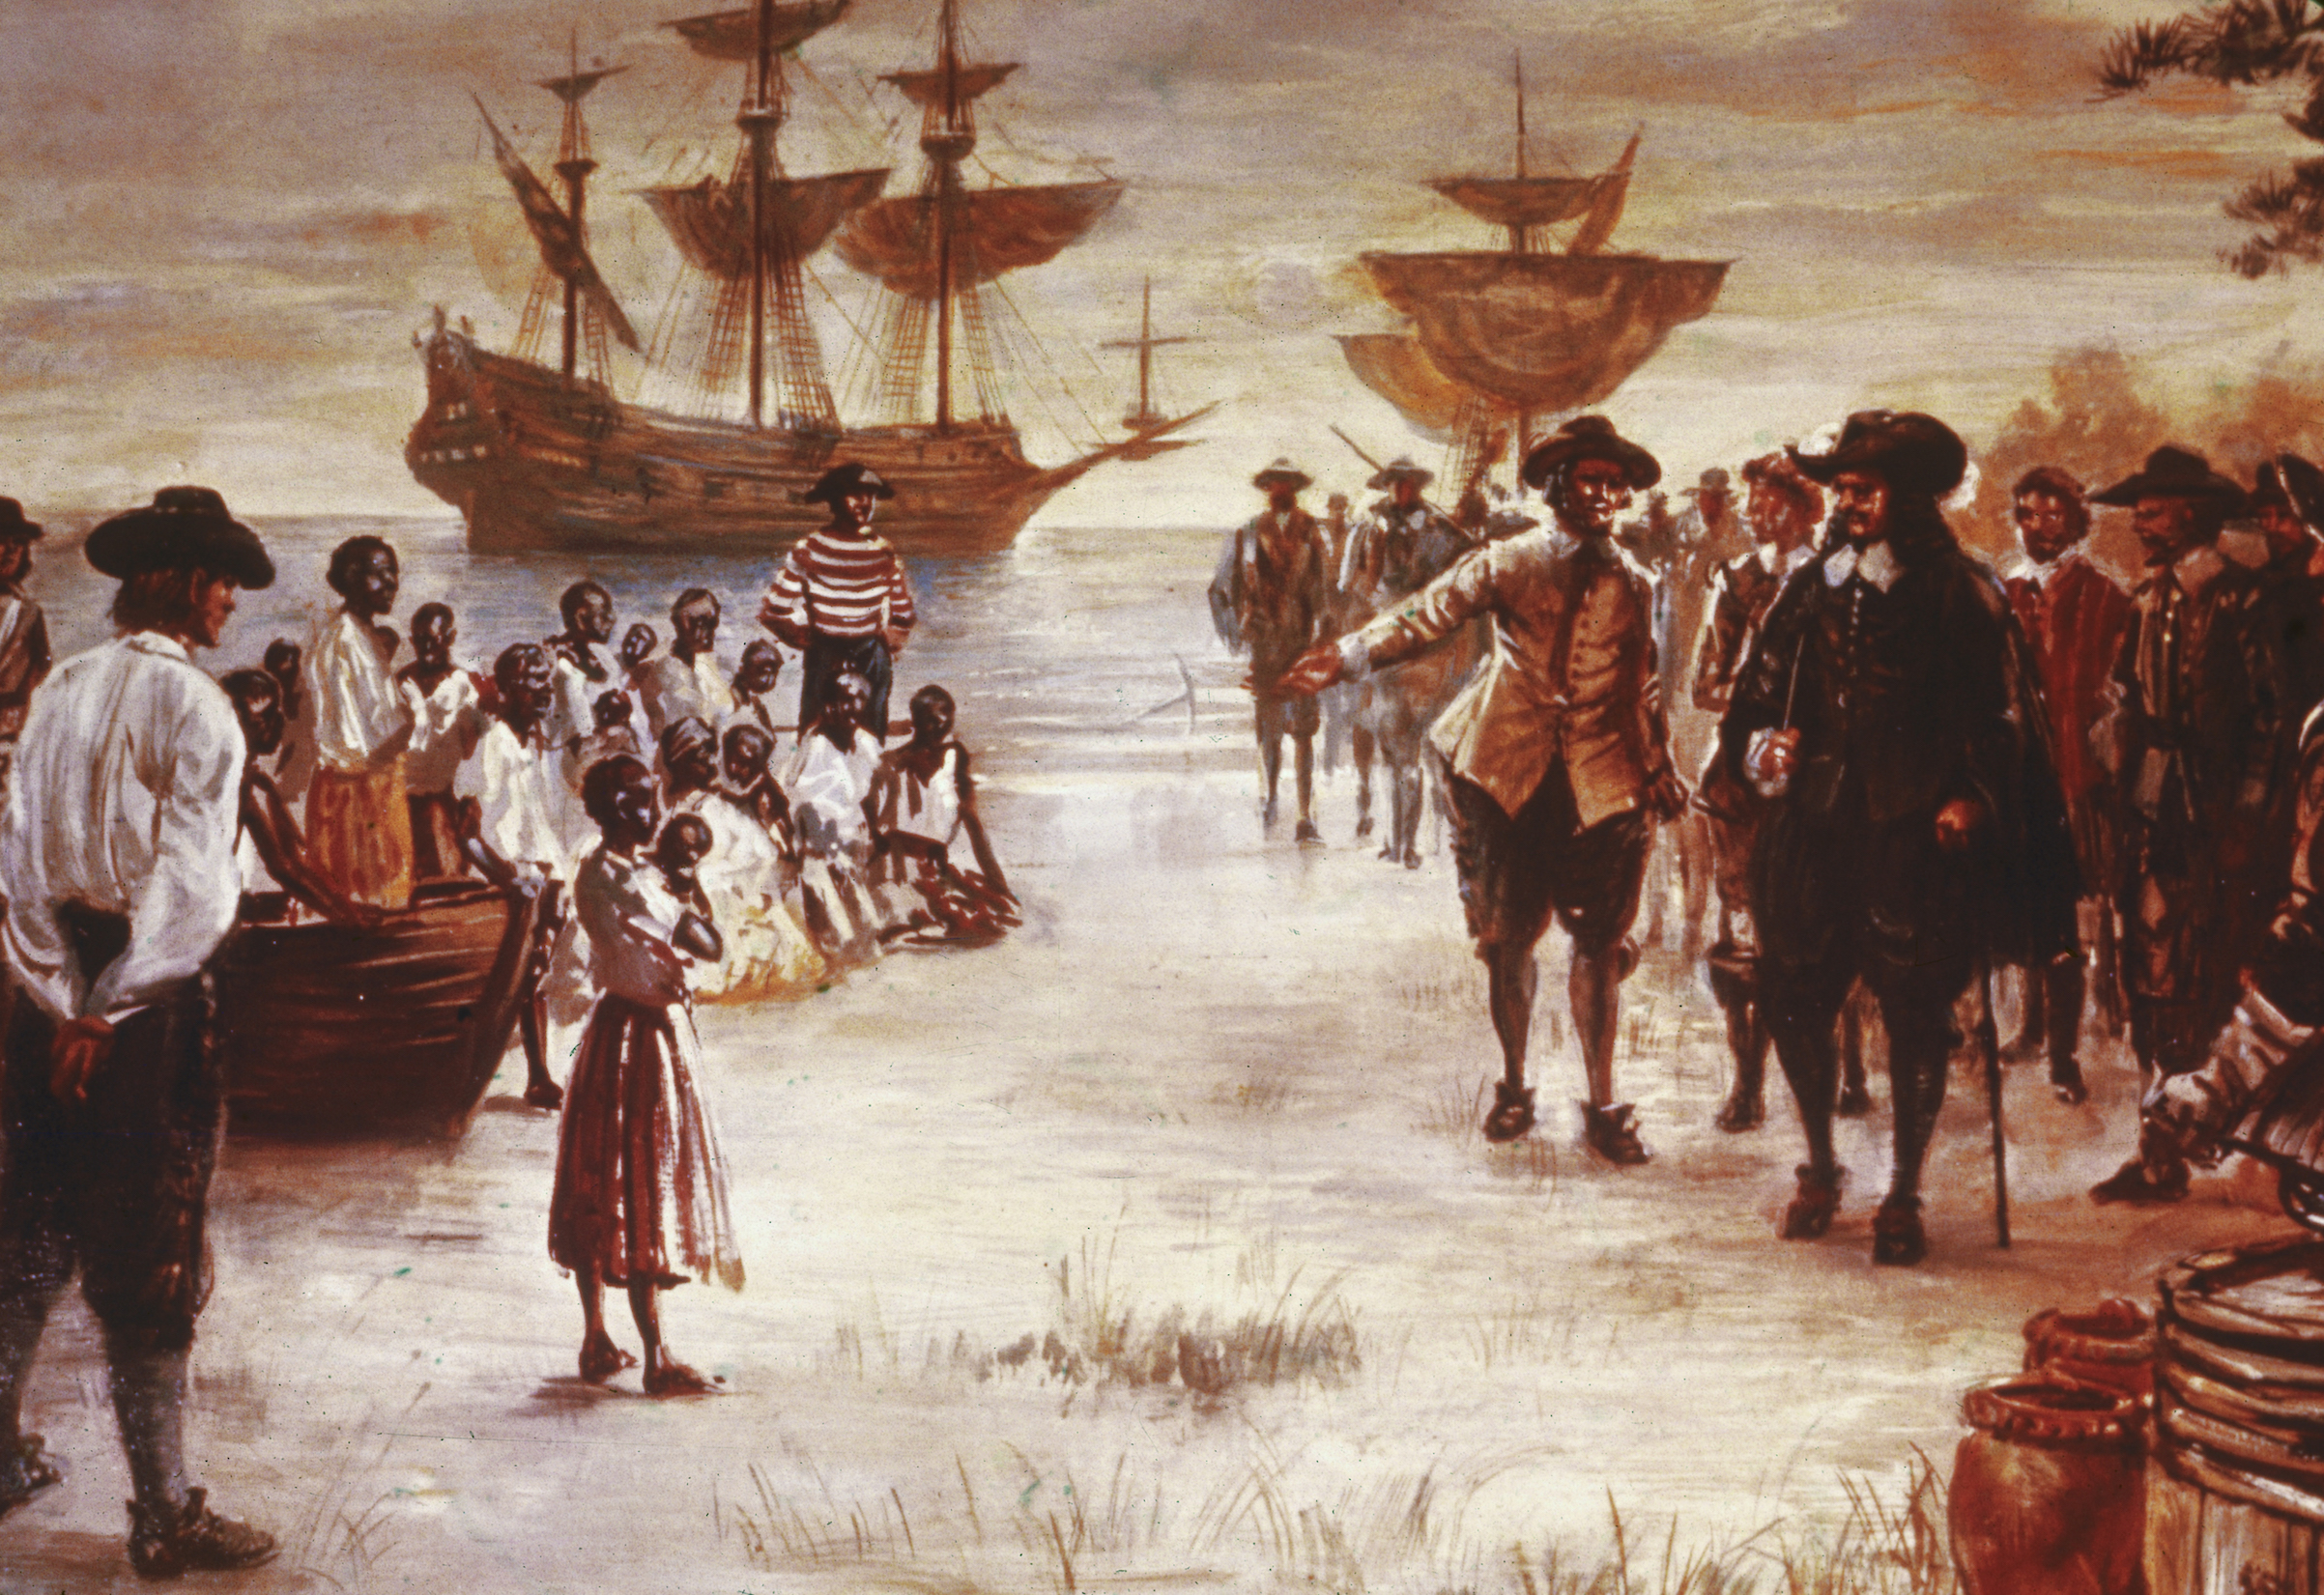 An engraving shows the arrival of a Dutch slave ship with a group of enslaved Africans for sale, Jamestown, Va., 1619. (Getty Images—2004 Getty Images)